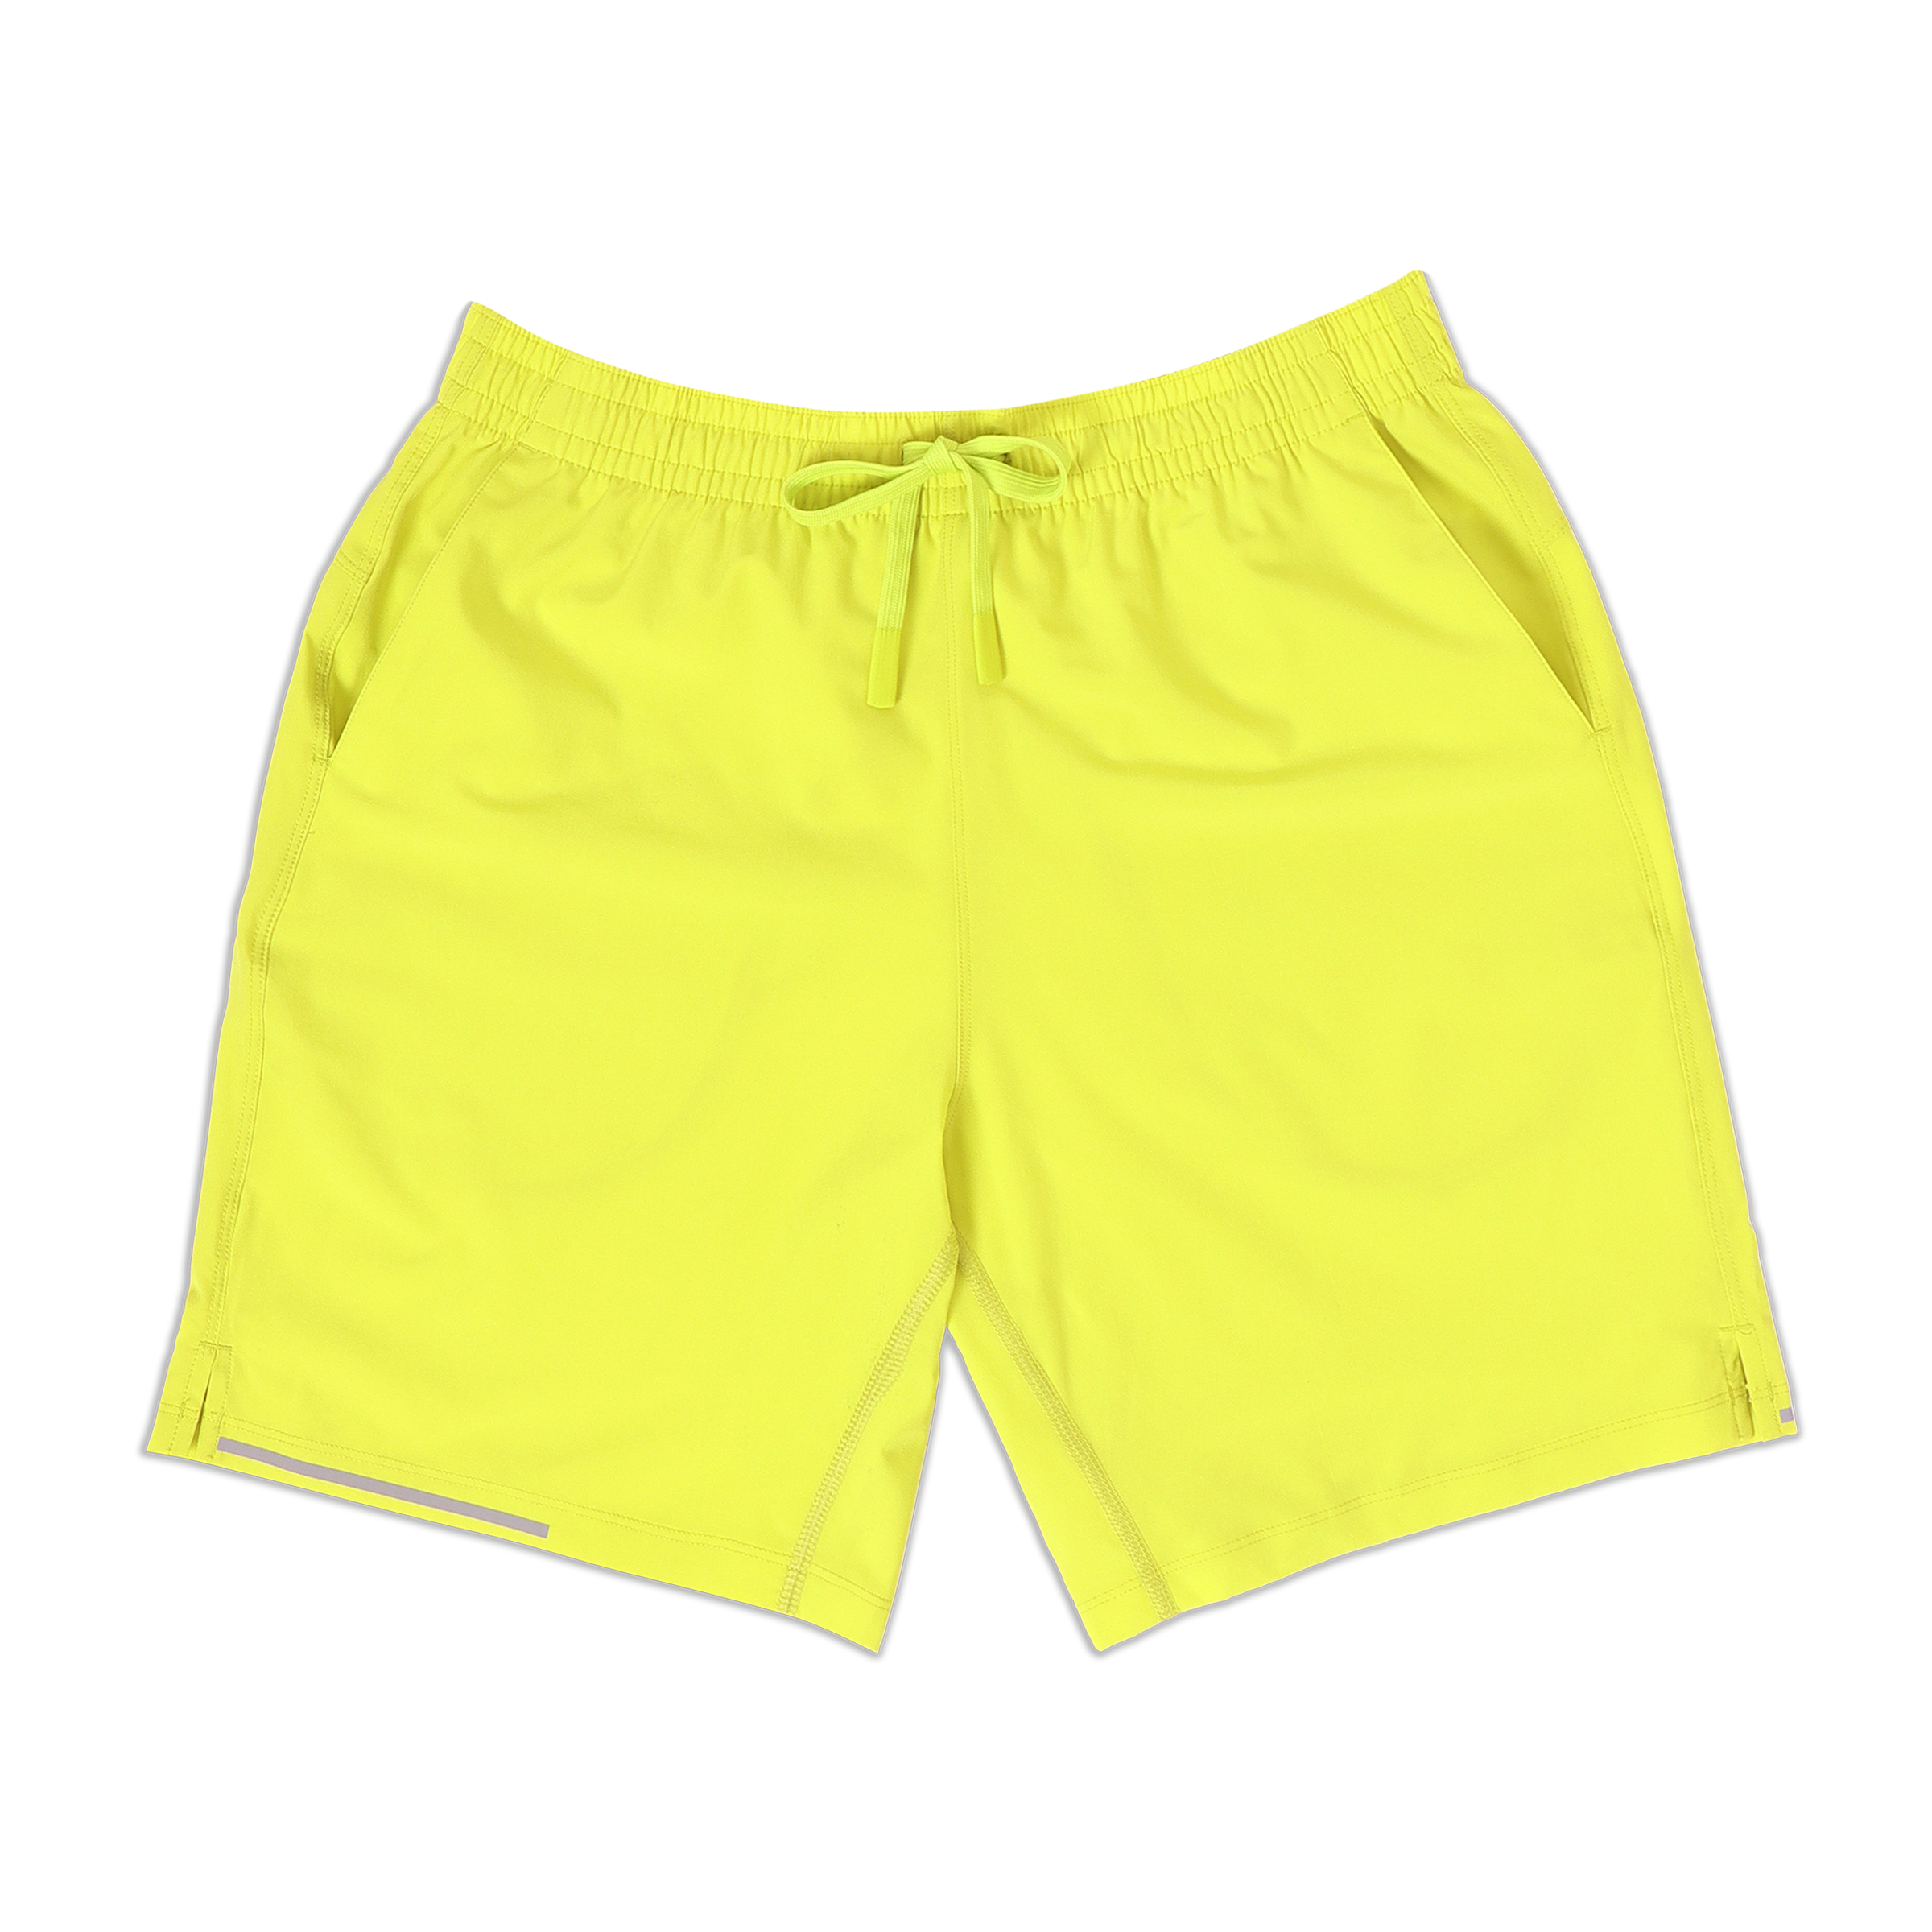 Run Short v2 7" Electric Yellow front with elastic waistband, dyed-to-match drawstring with rubberized tips, two front pockets, split hem, and reflective line on bottom right hem